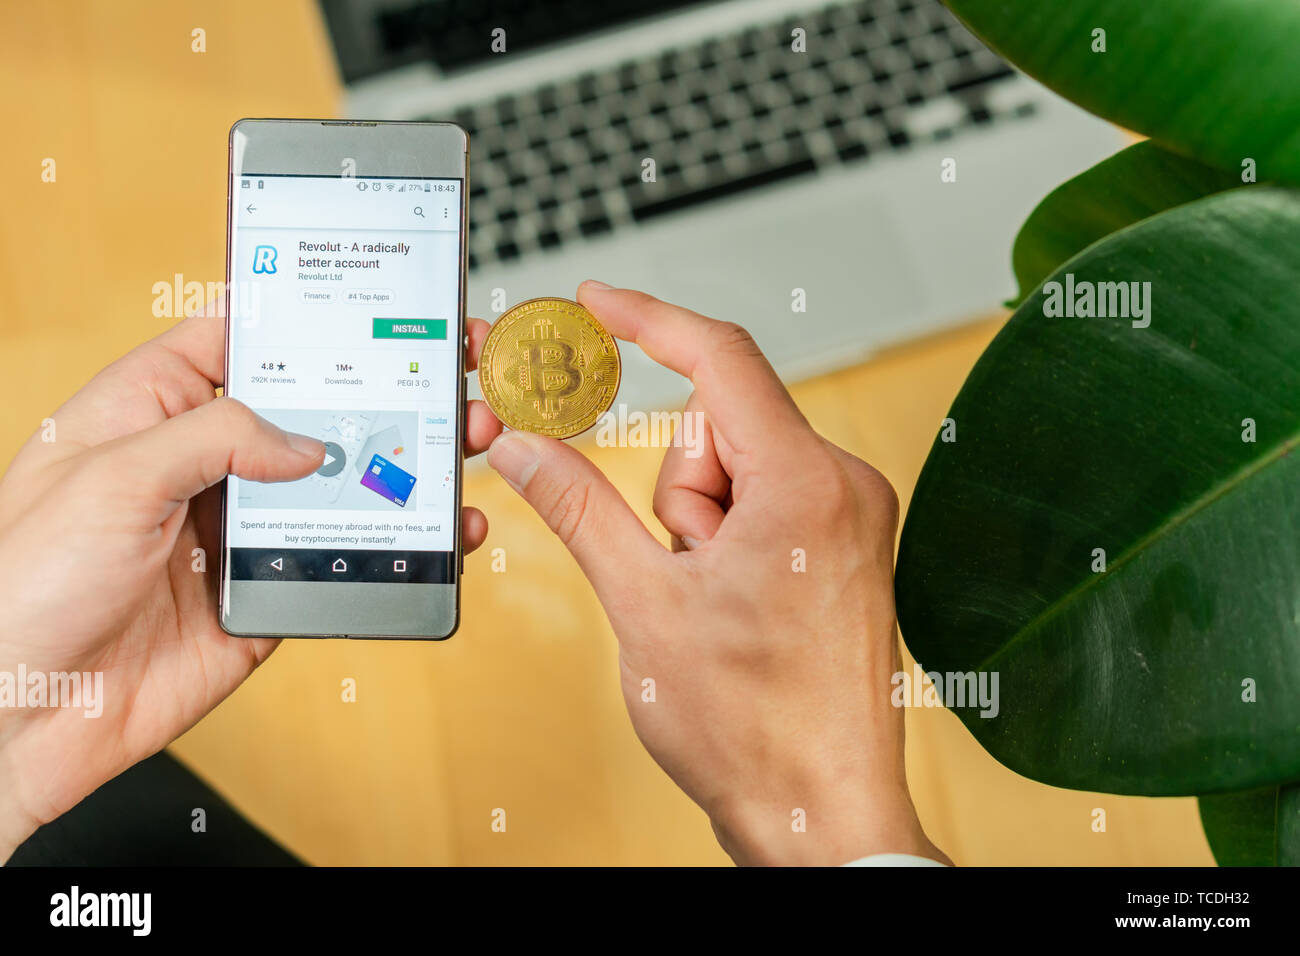 Ljubljana, Slovenia 29.4.2019: Businessman holding smartphone and trying to download revolut app and Bitcoin coin on a office desk Stock Photo